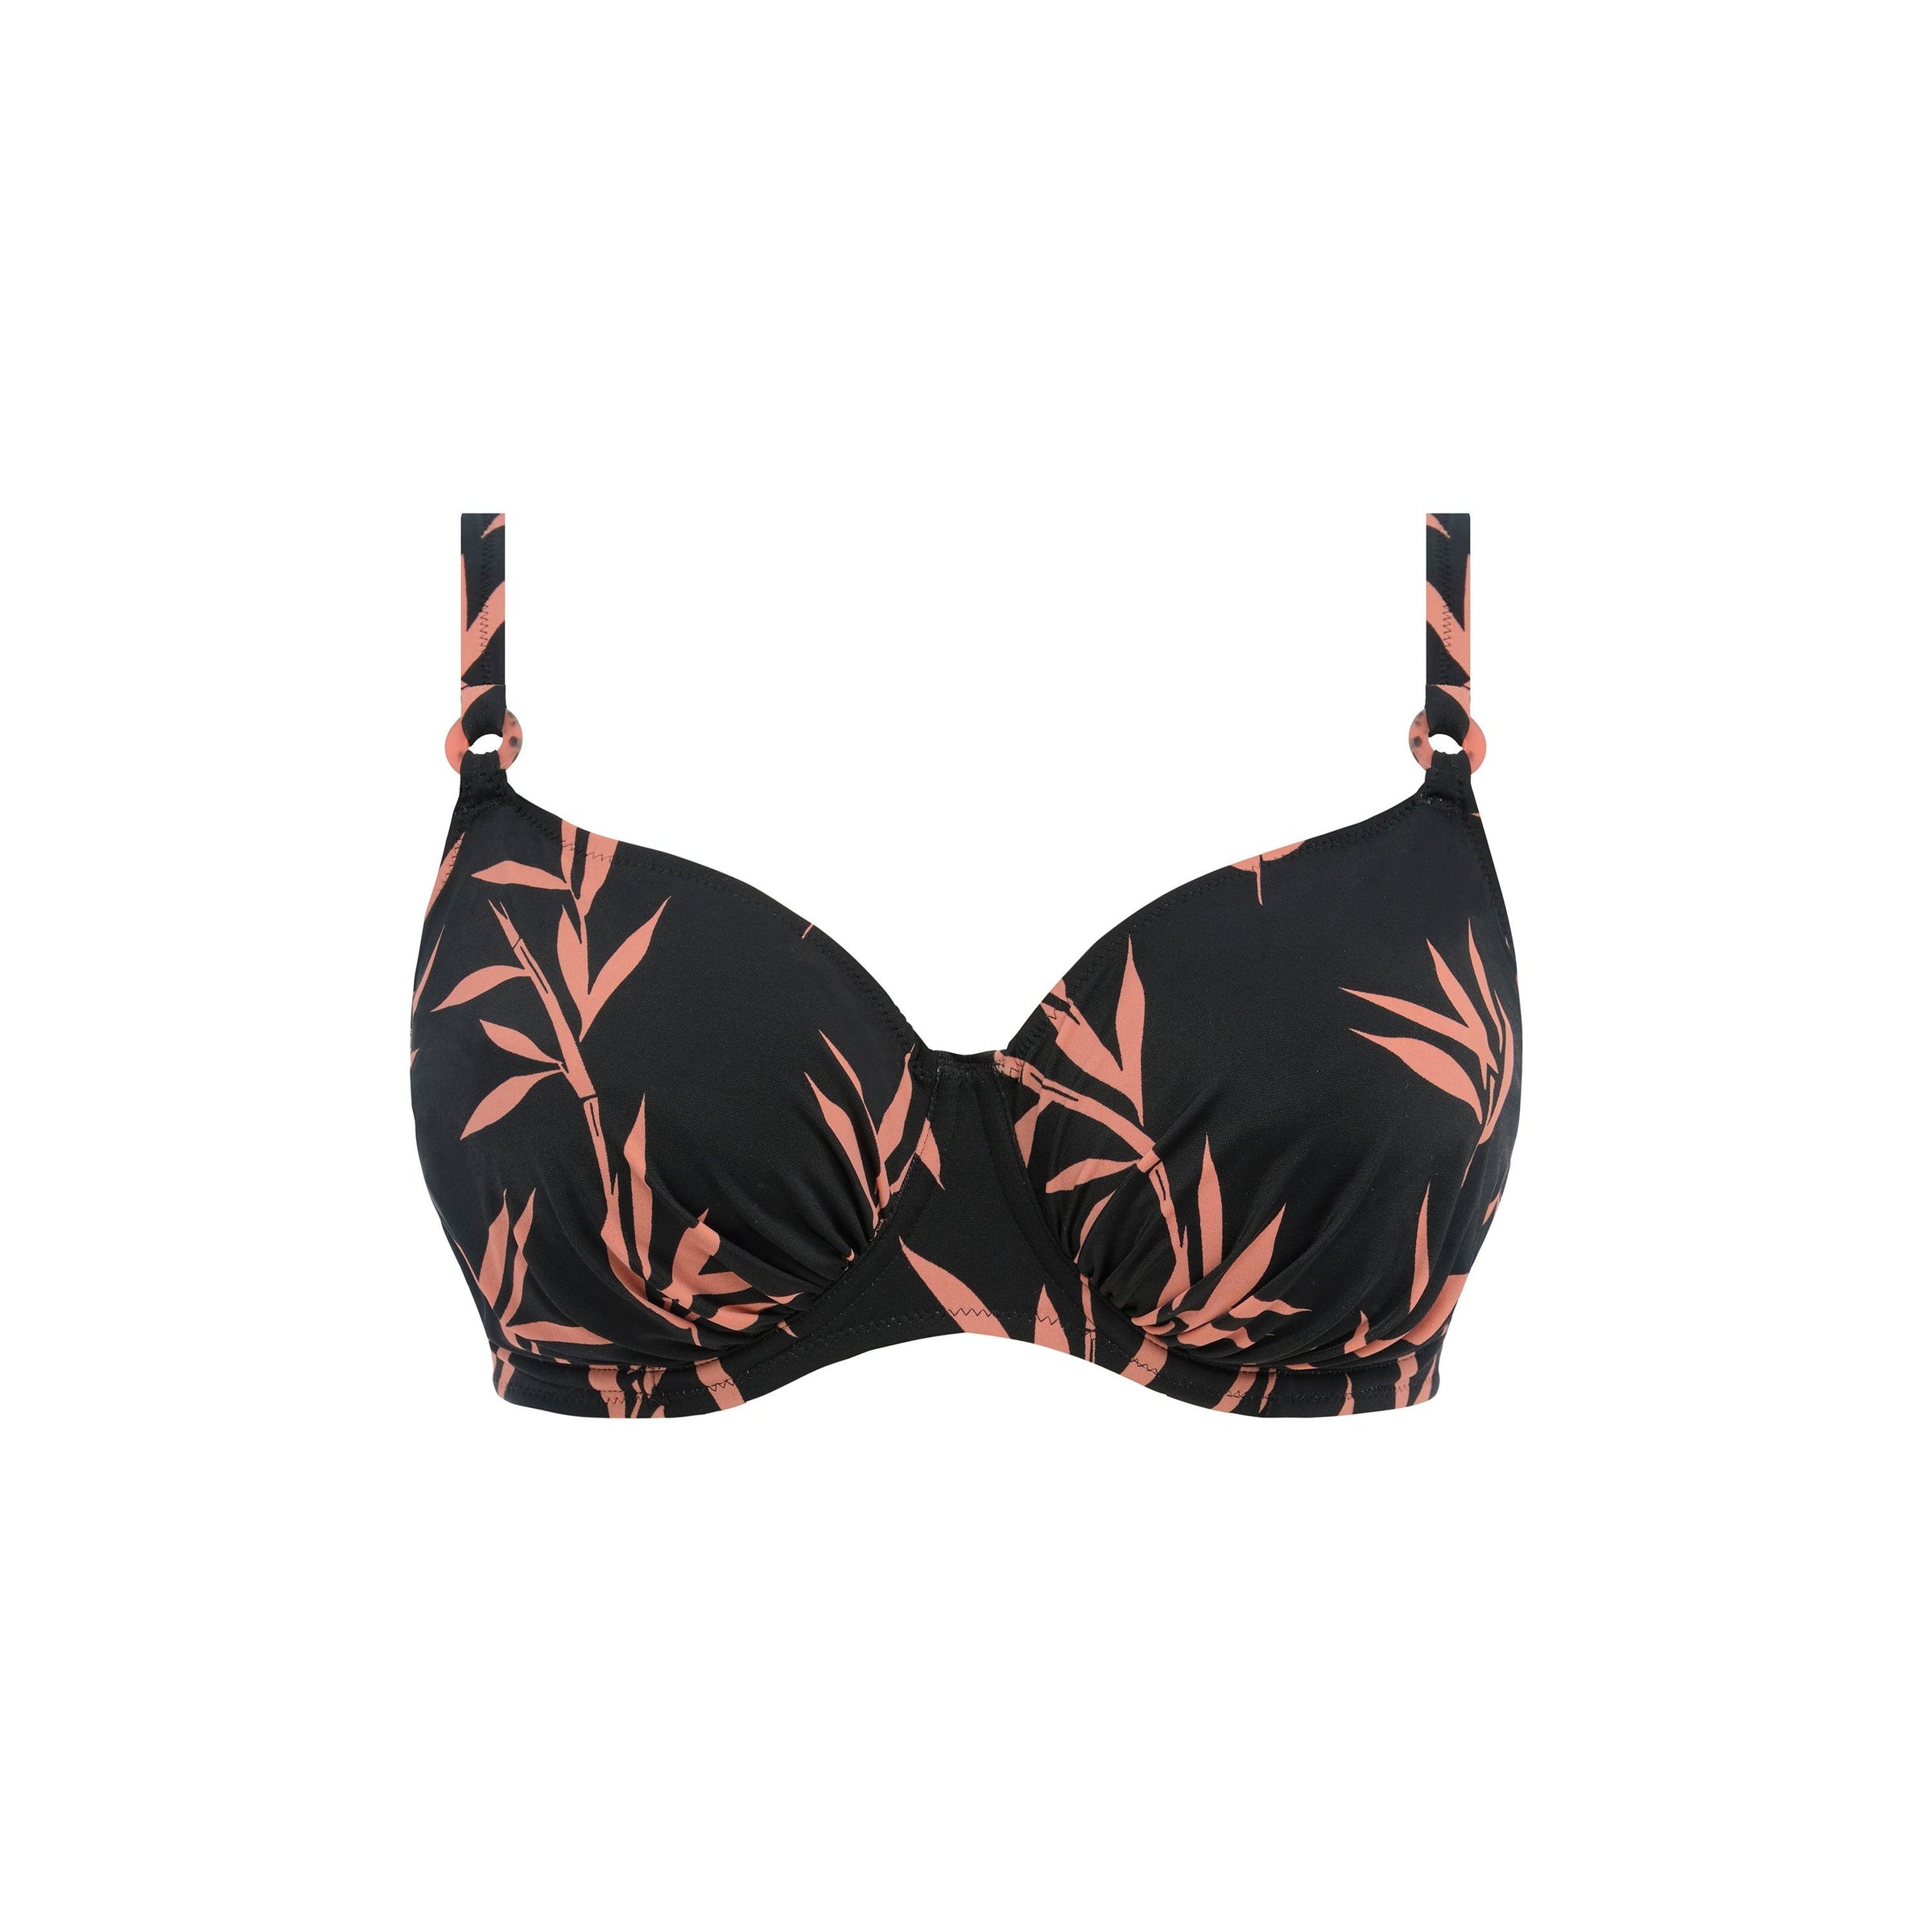 Guria Beachwear (Cute & Sexy Collection) Ring Padded Bandeau Top